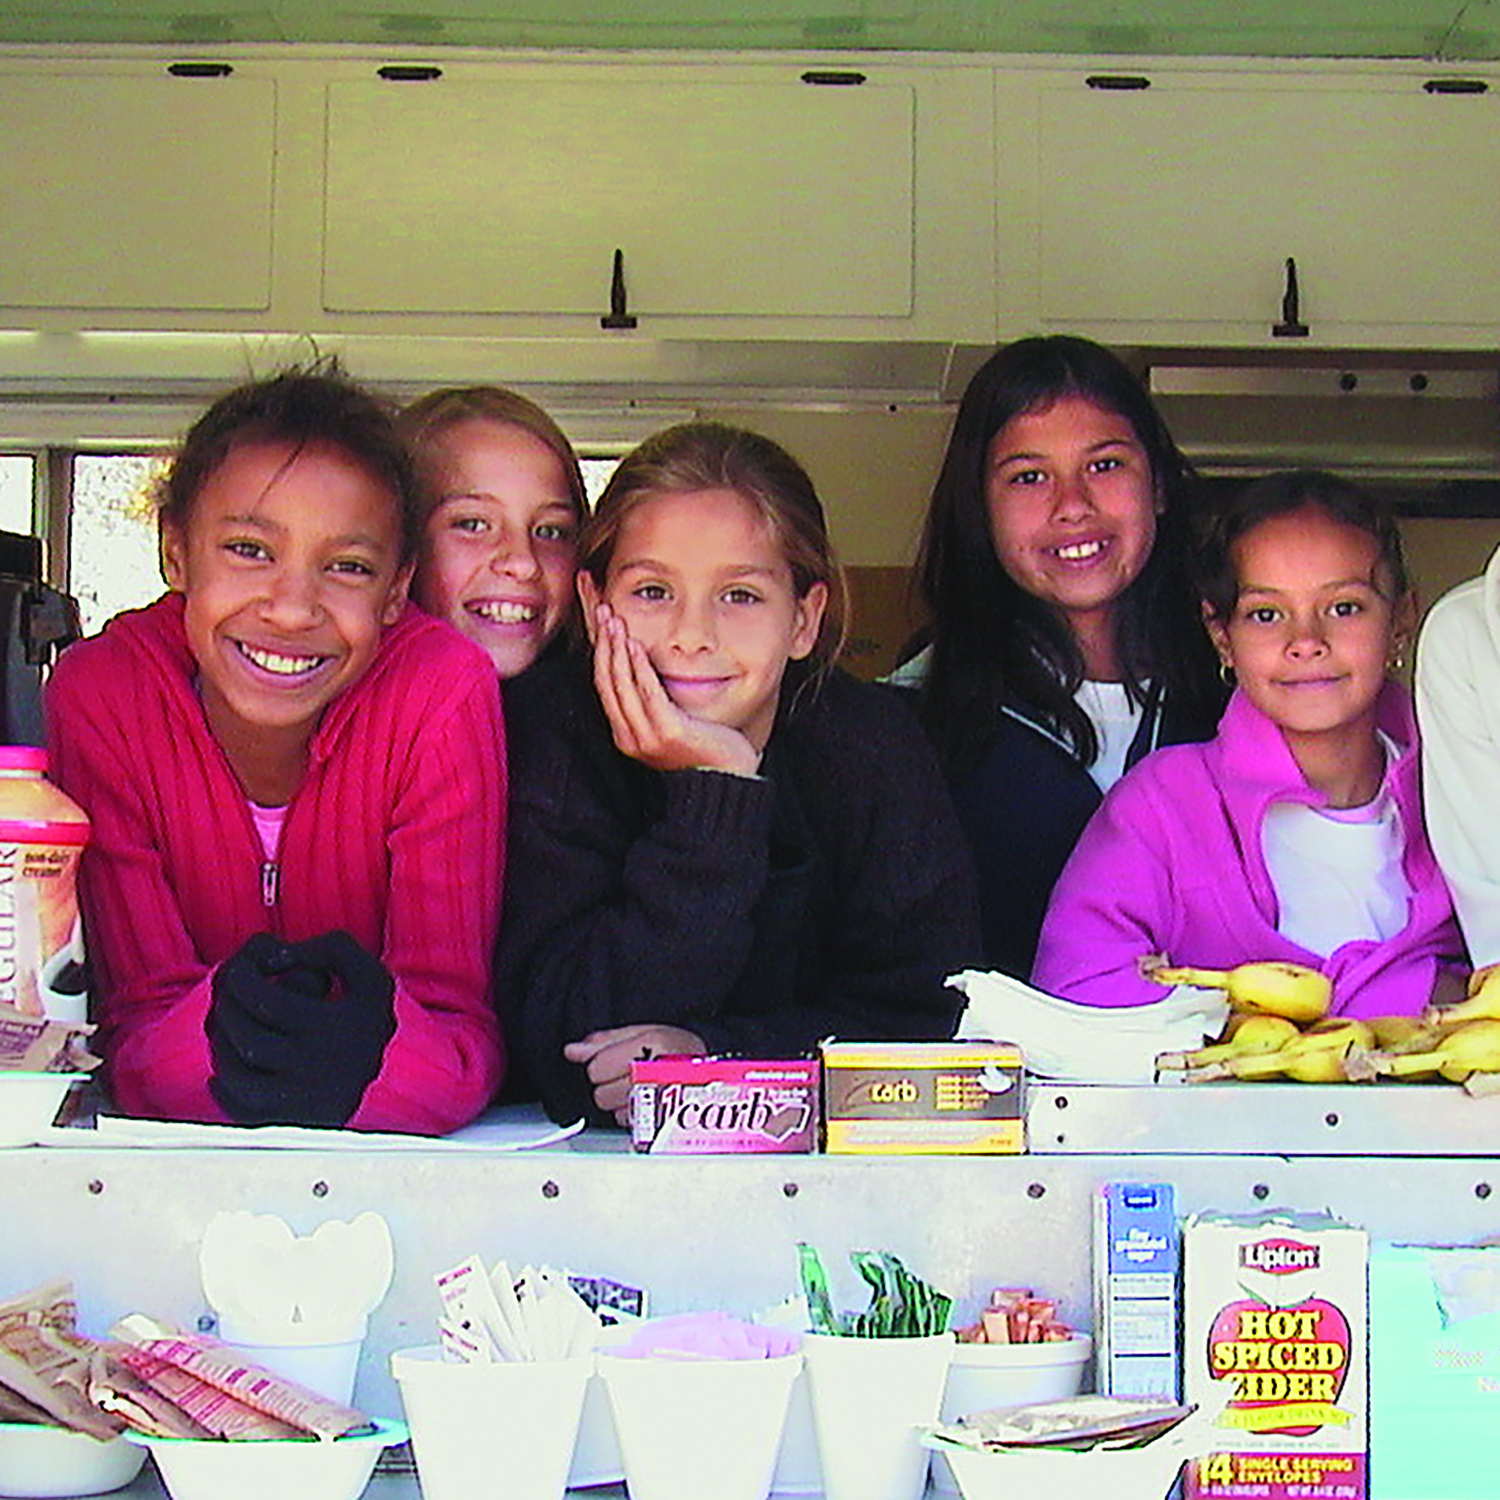 A group of kids behind the counter of a snack bar